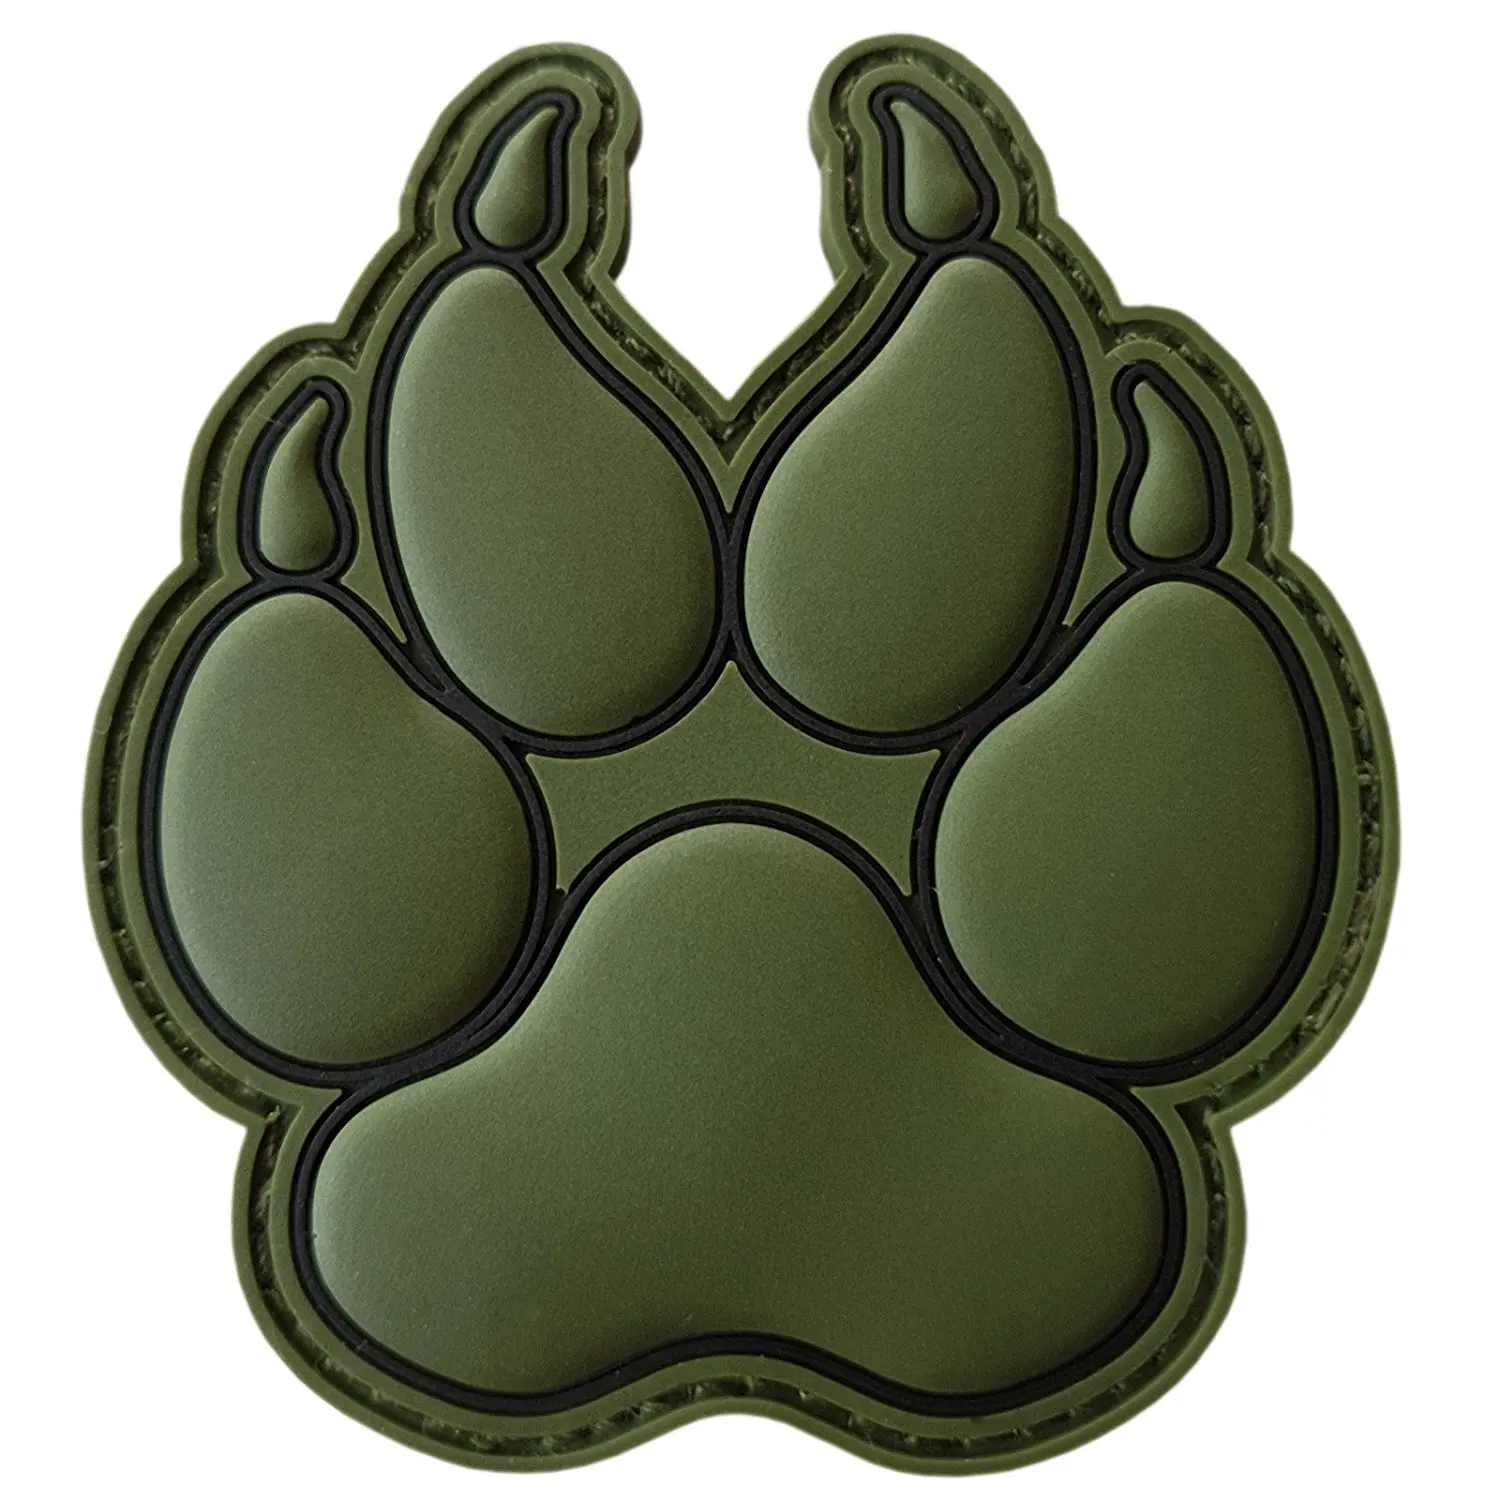 K9 TIMENT CANIS MORSUM Fear The Bite Dog Handlers PVC Airsoft Patch White